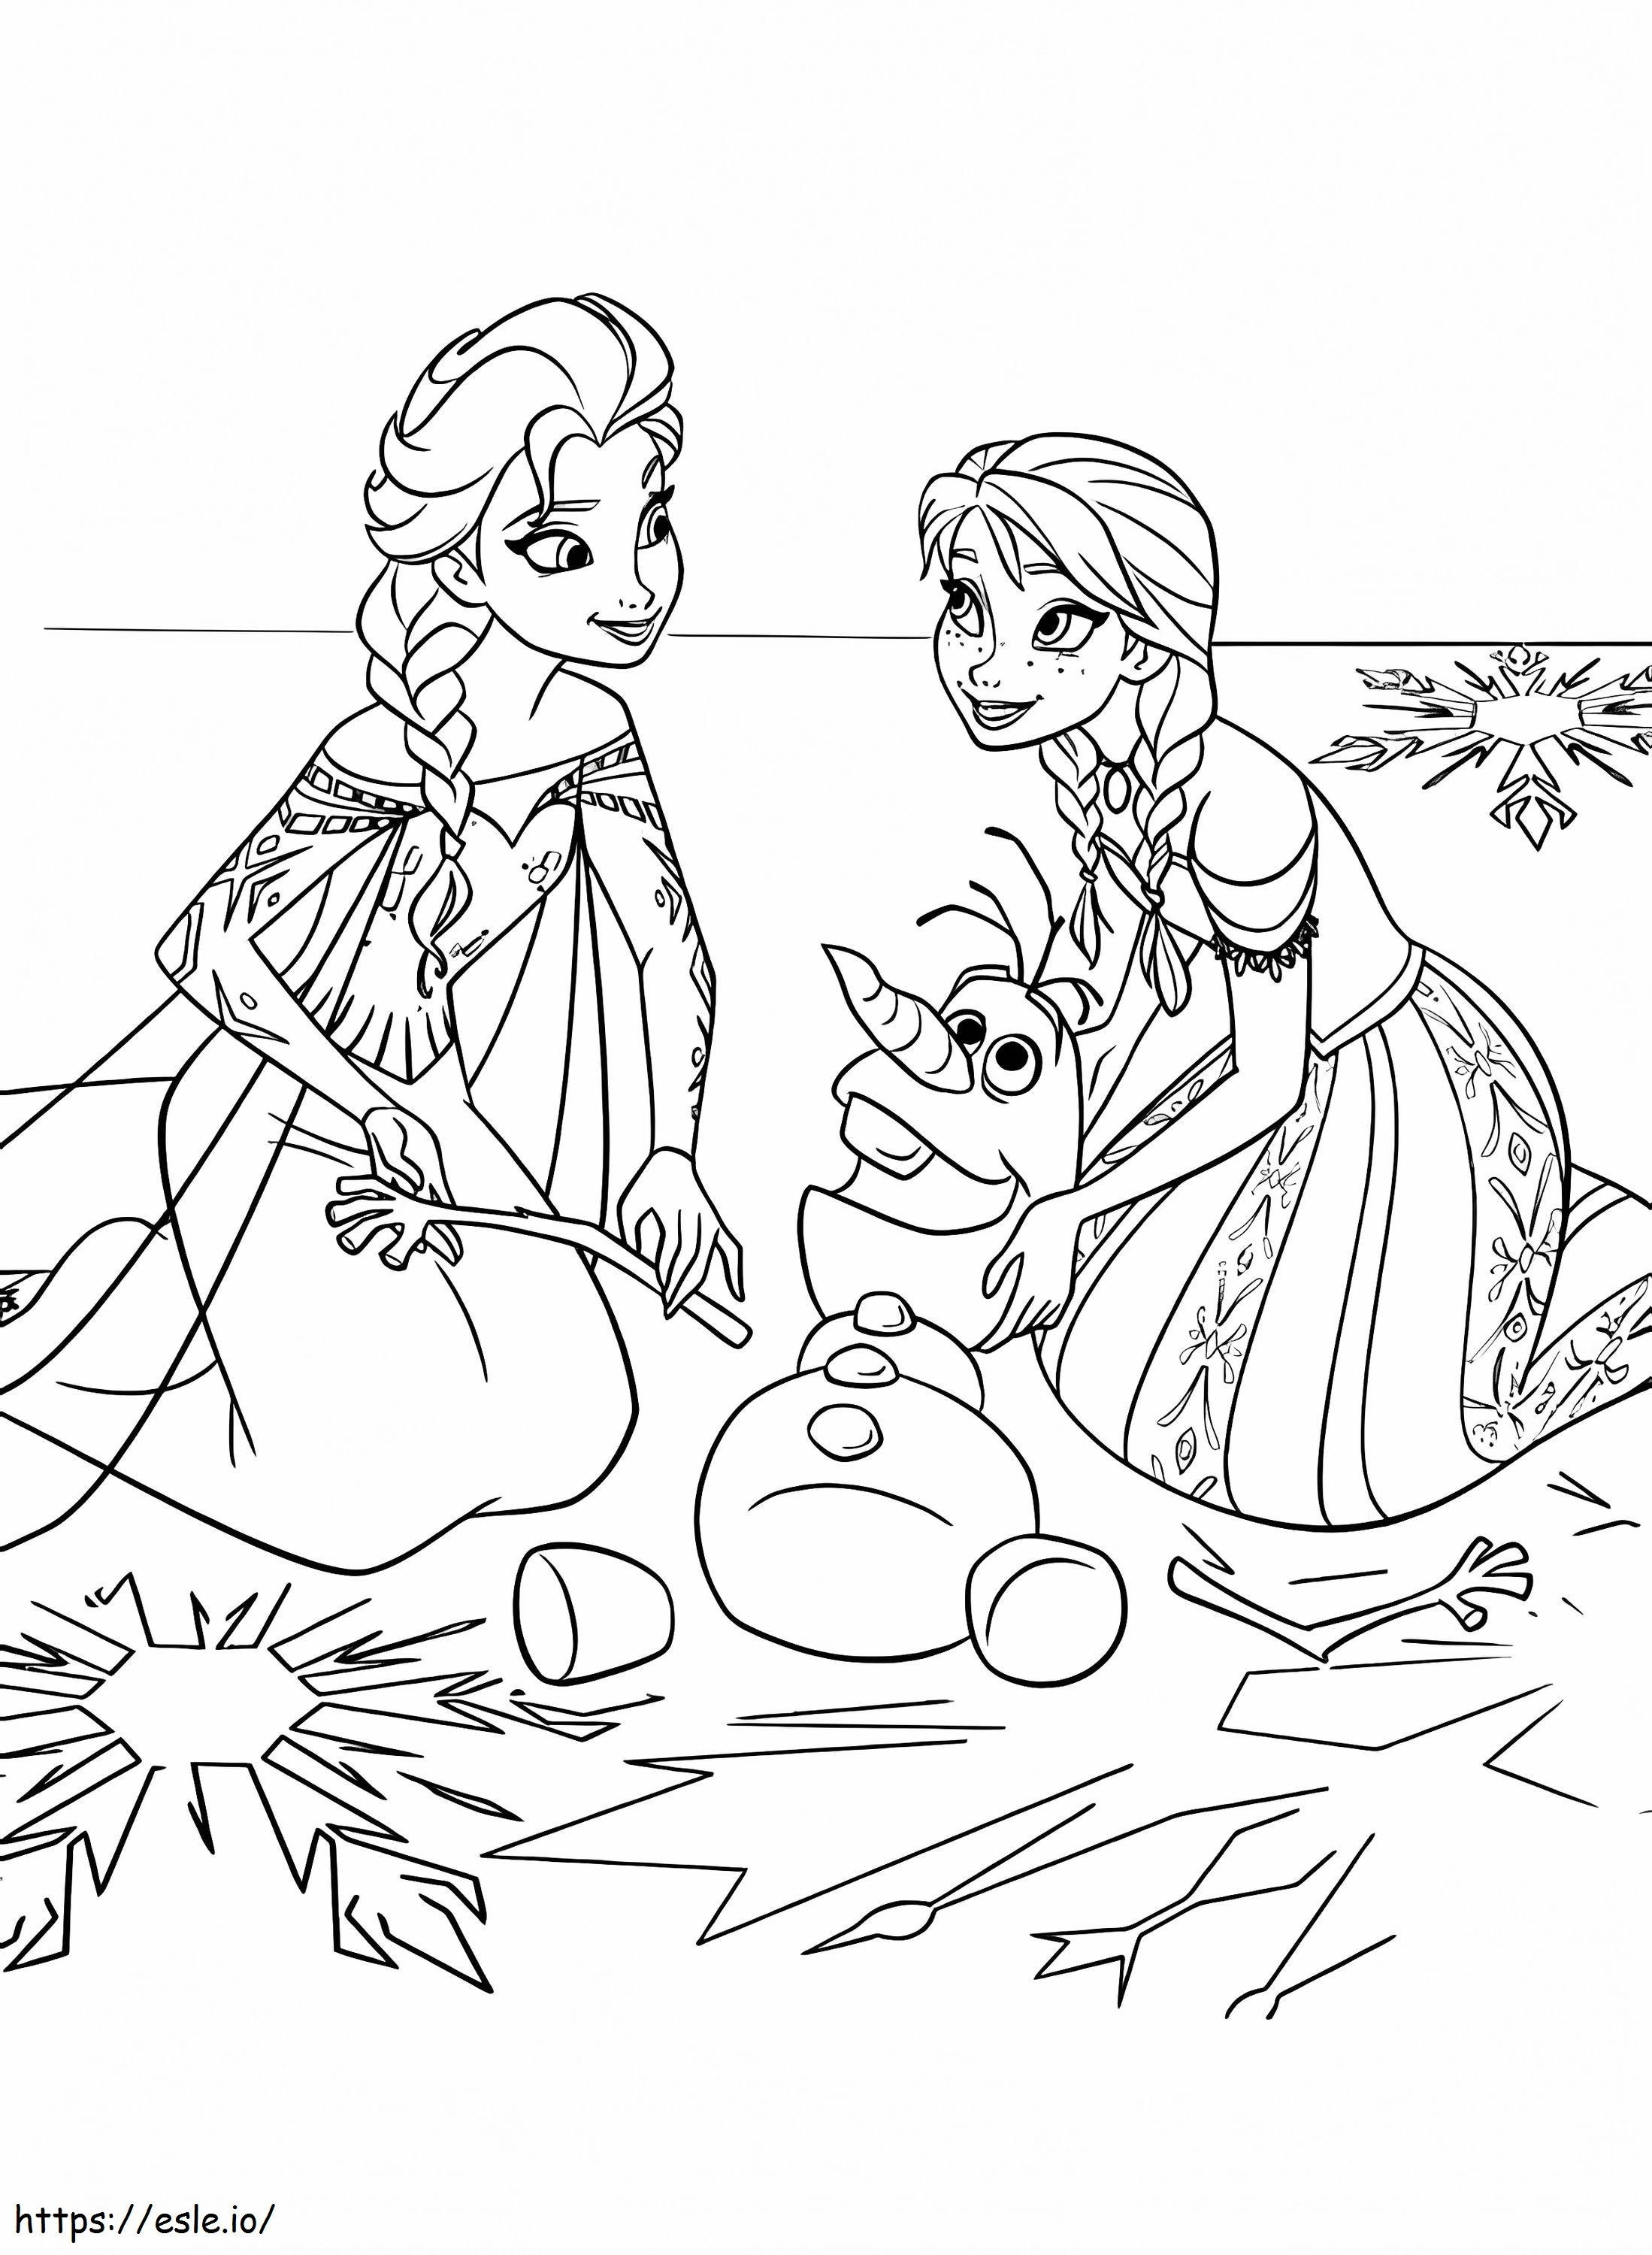 Olaf And Anna Elsa coloring page